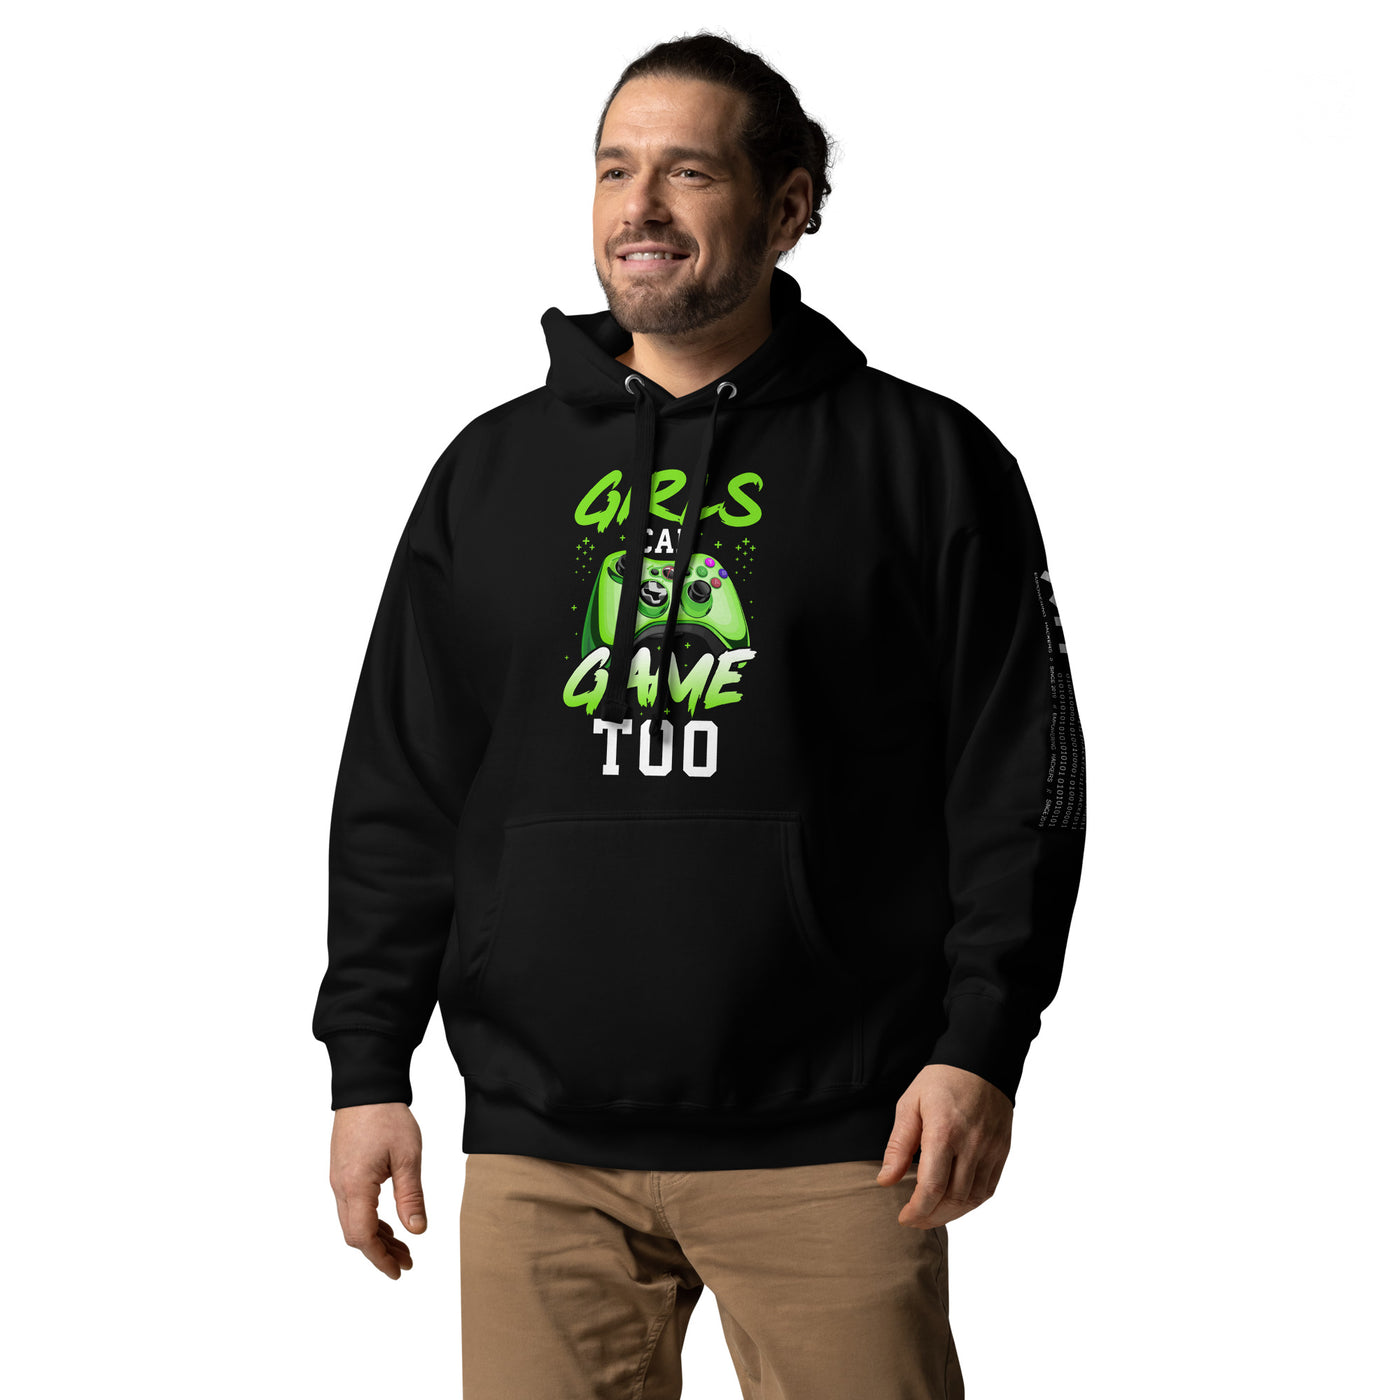 Girls can Game too Unisex Hoodie